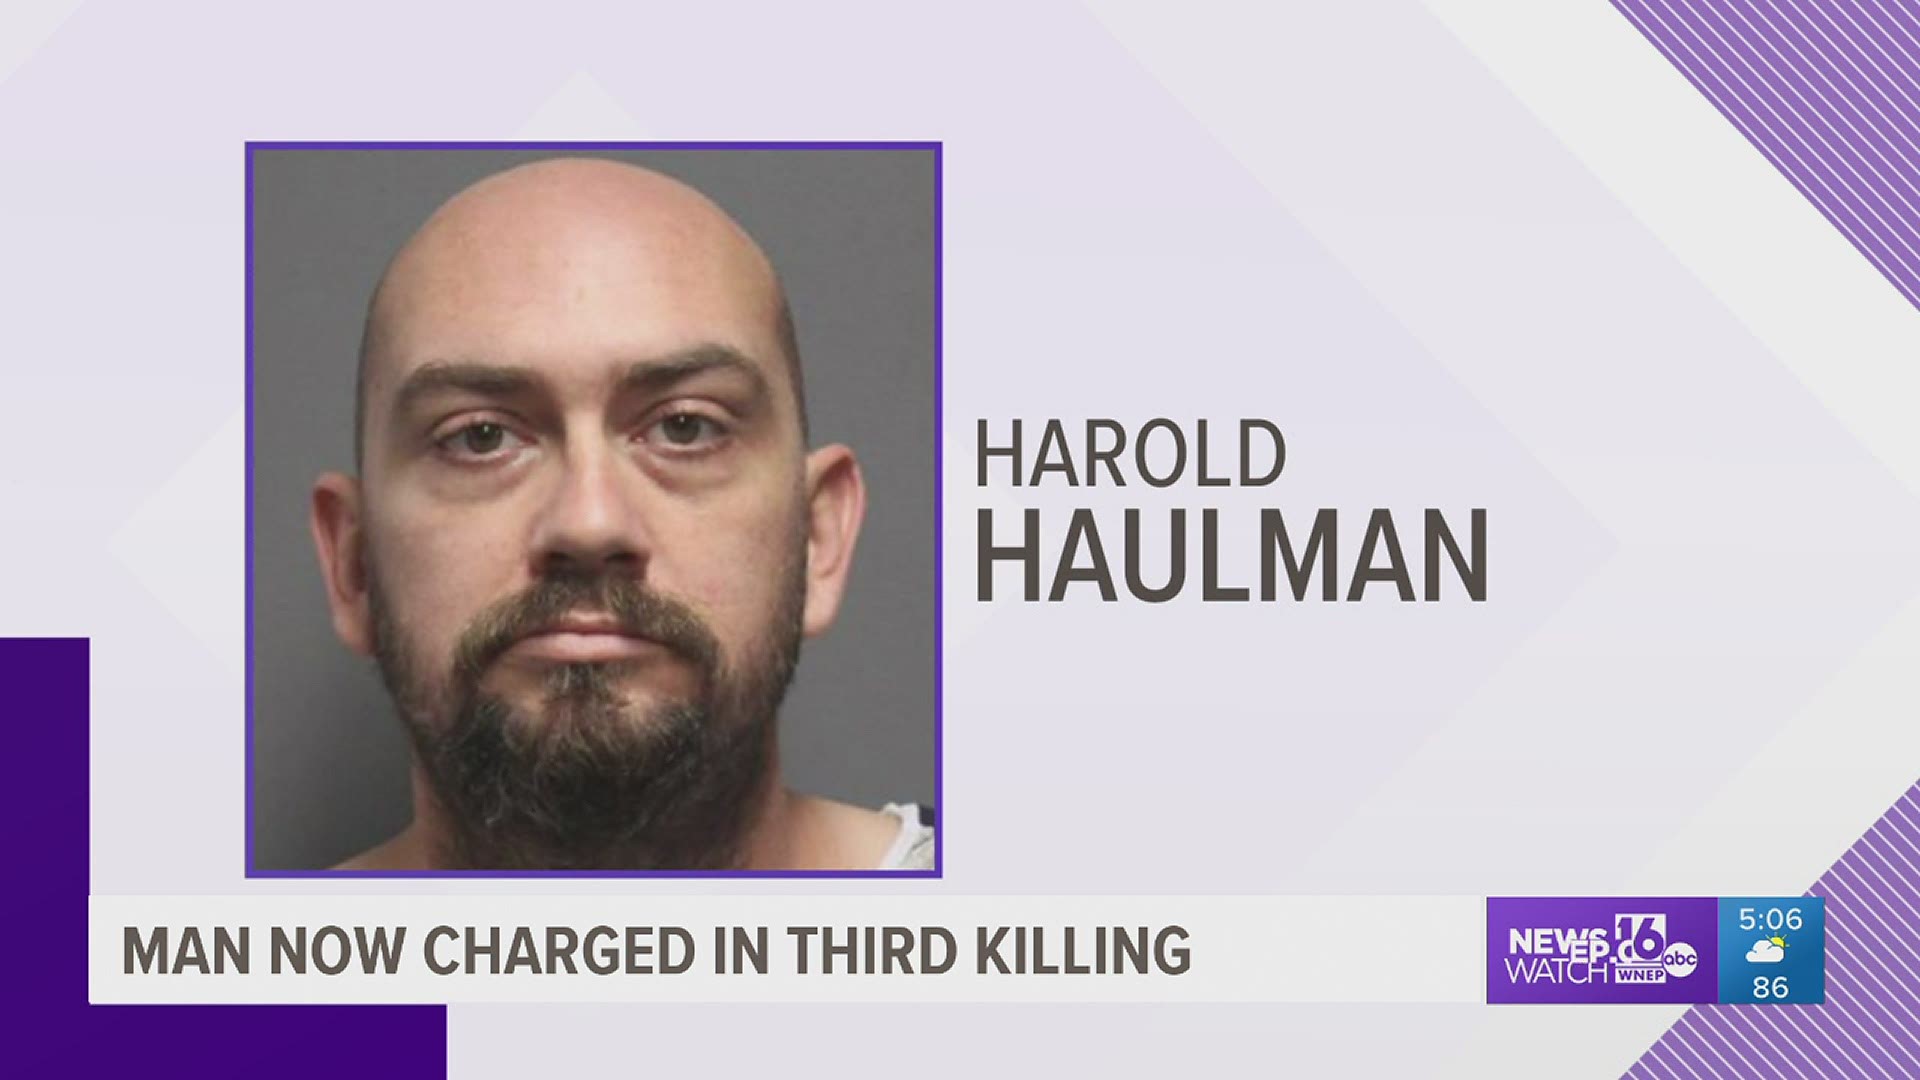 Harold Haulman already faces charges in the deaths of a woman from Bloomsburg and a woman from Snyder County.